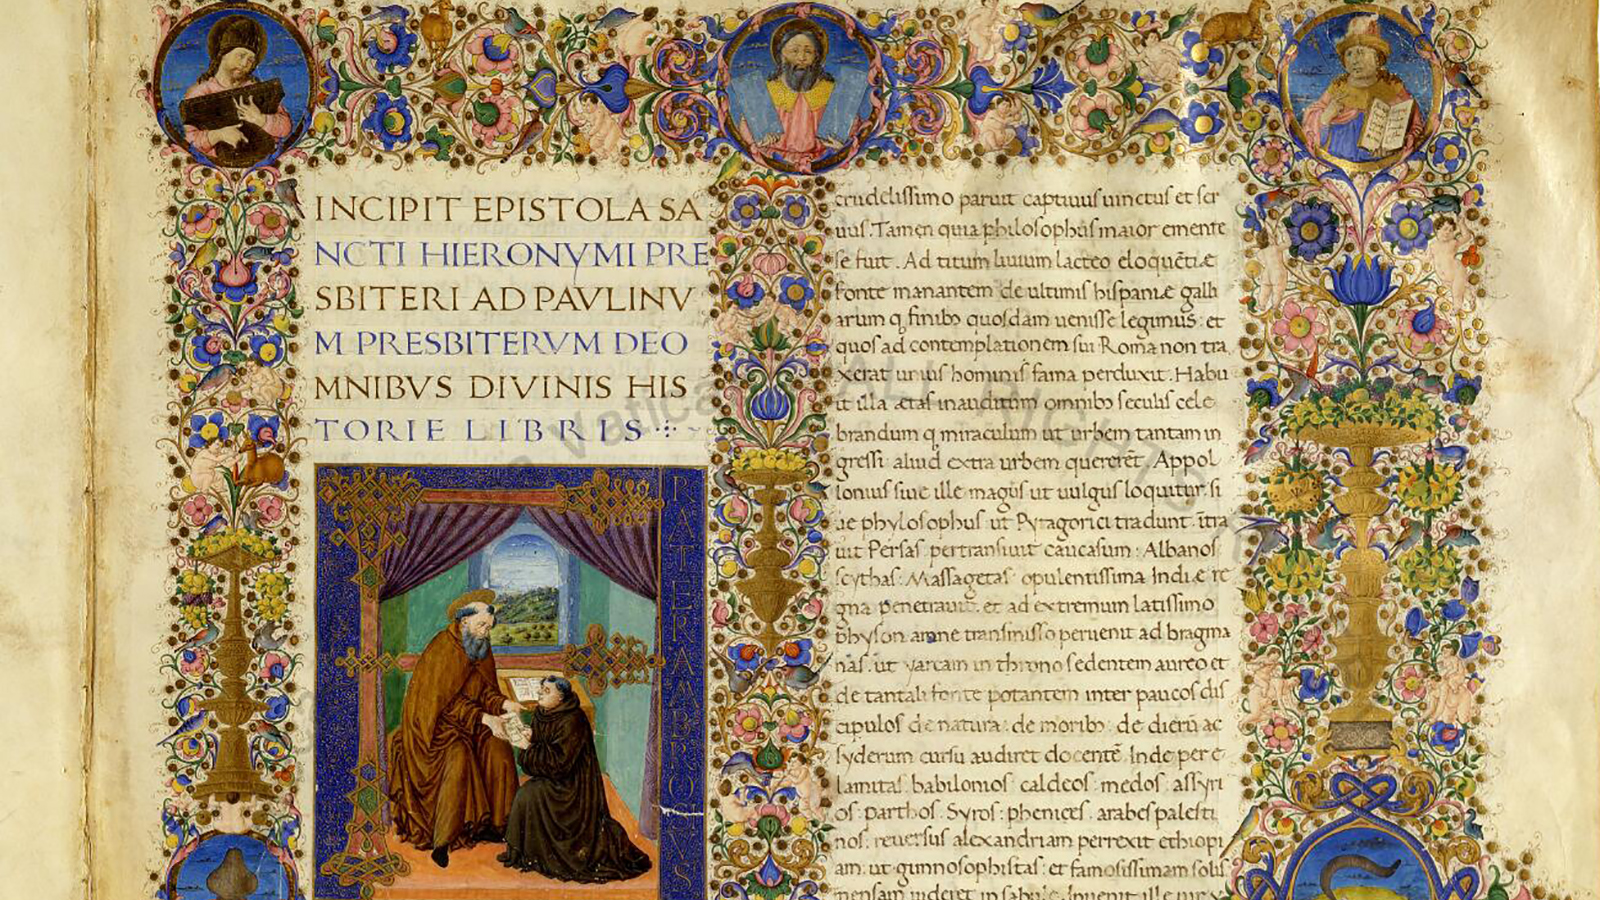 Detail of 2R from Manuscript - Urb.lat.1 in the Biblioteca Apostolica Vaticana collection